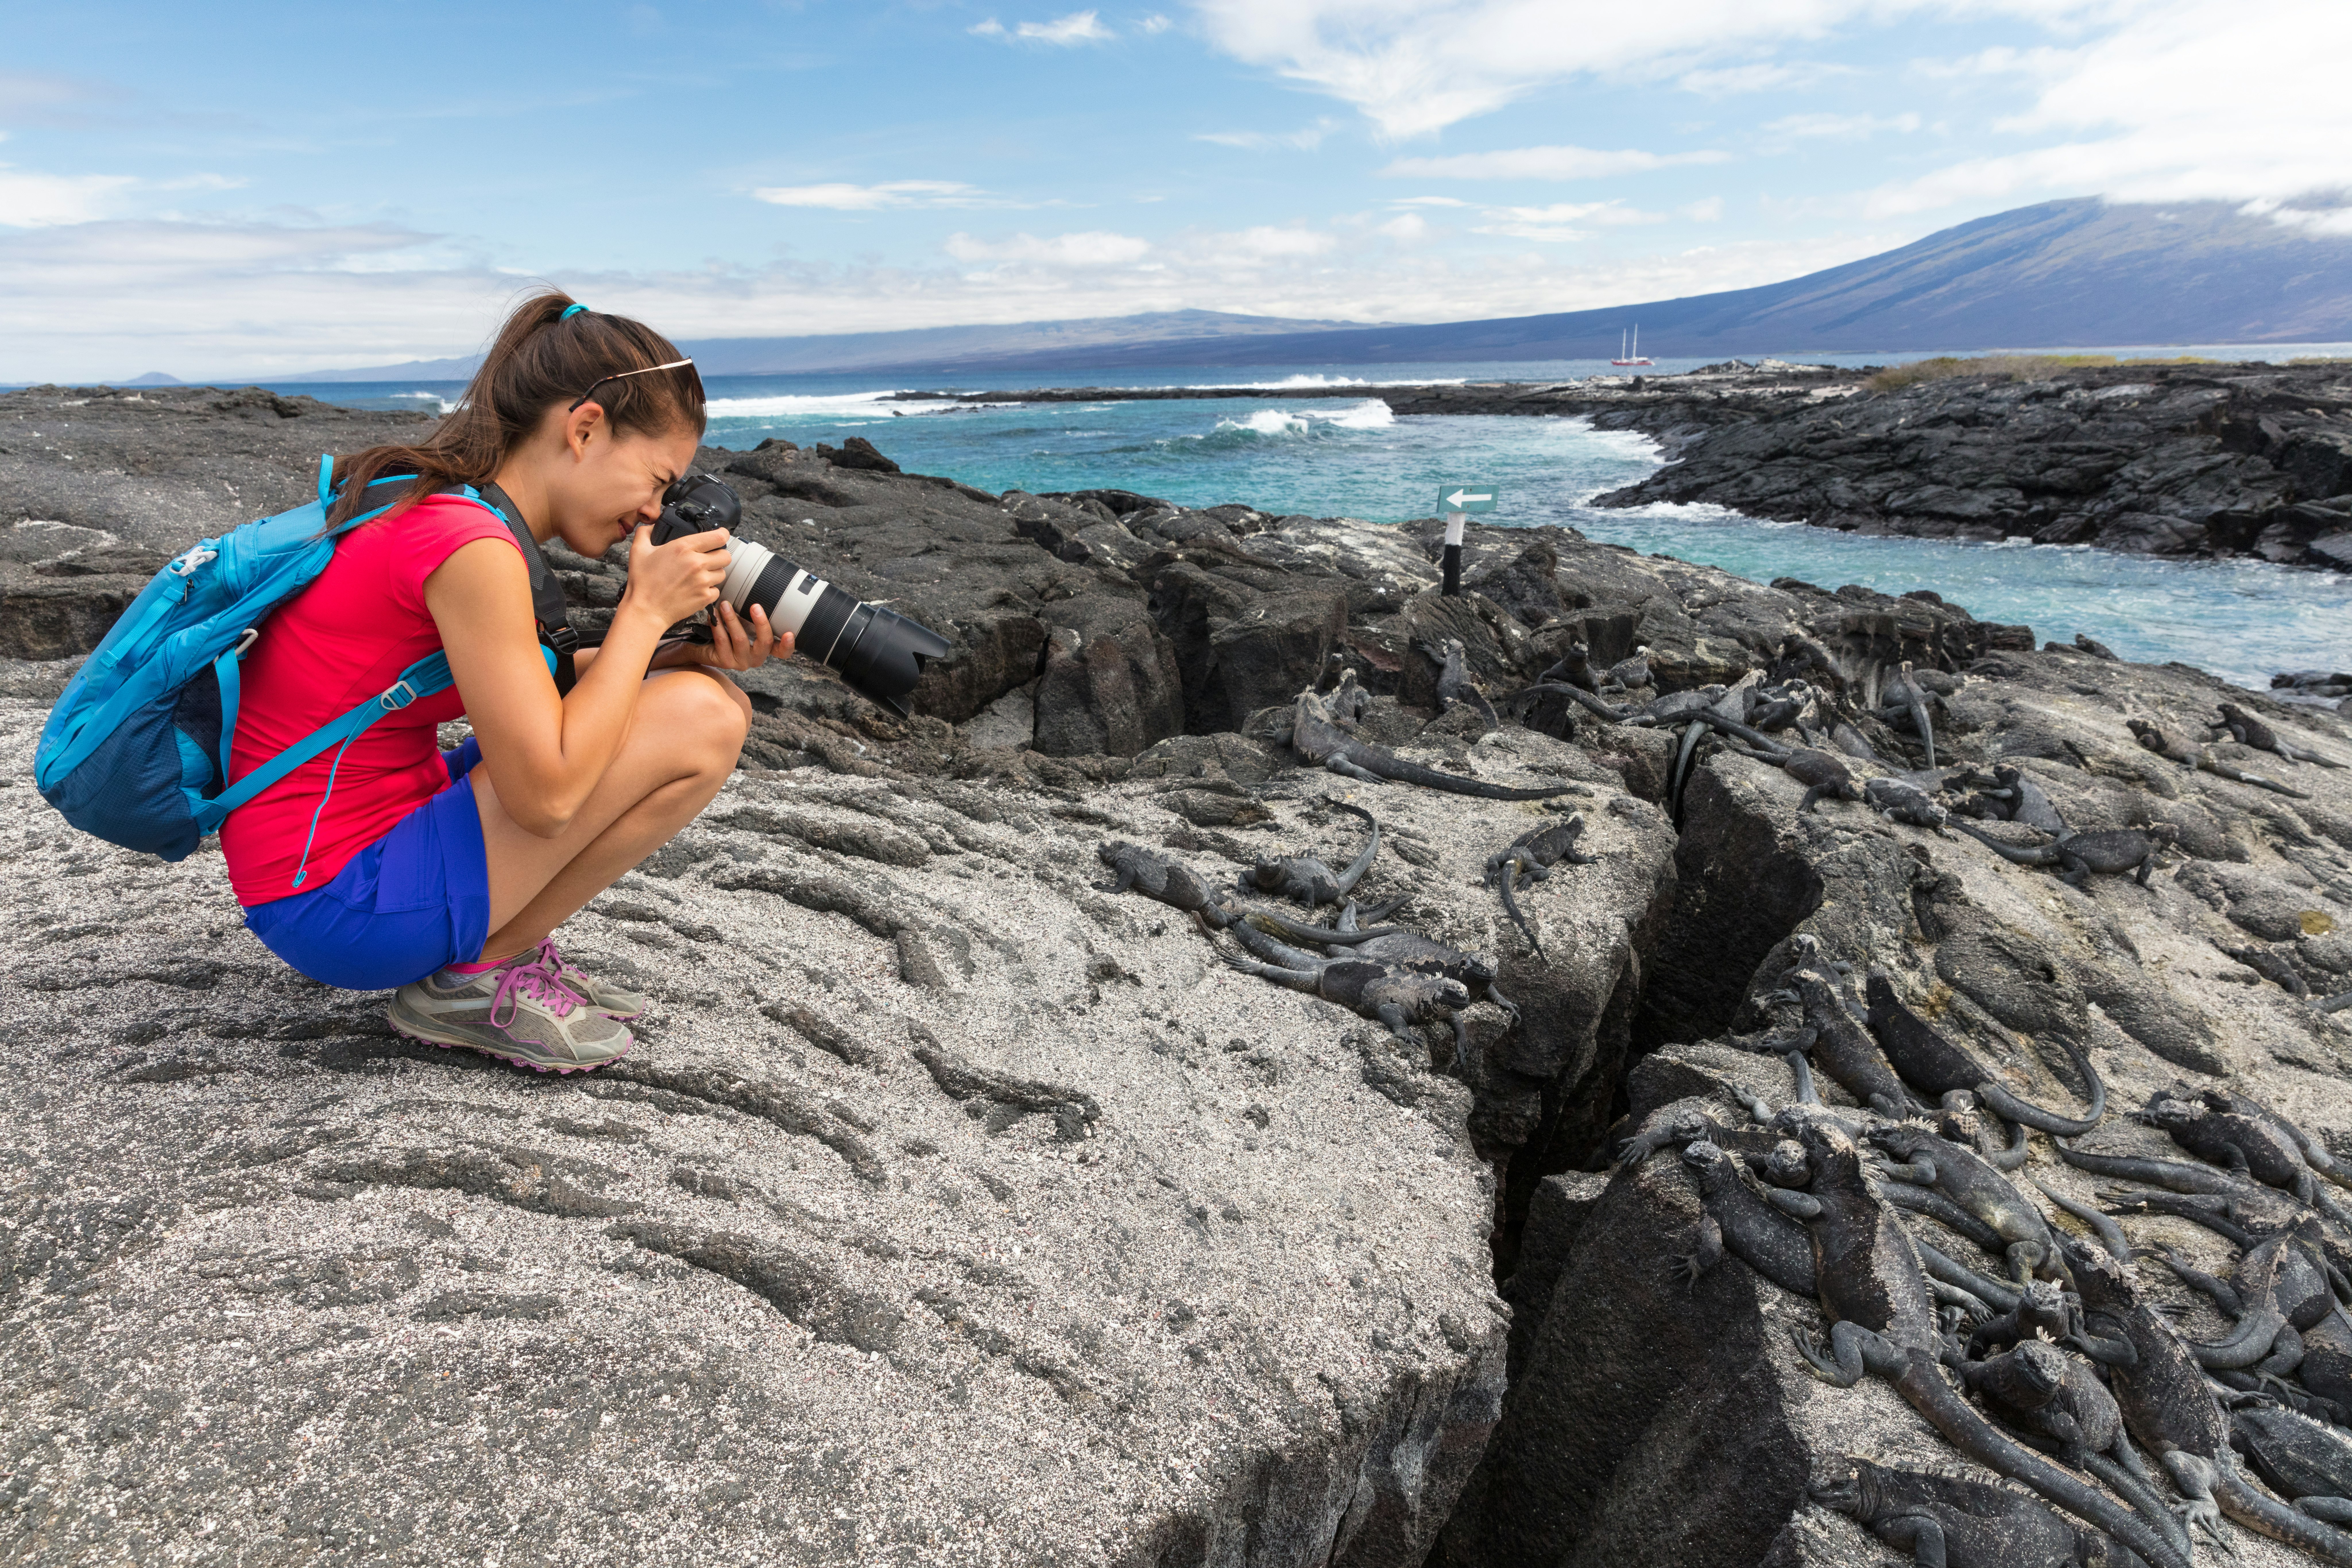 A young brunette woman with a ponytail, red t-shirt, blue shorts, light blue backpack, and grey tennis shows squats on a rock bluff taking a picture of the surrounding ocean scenery using a DSLR camera with a long telephoto lens 